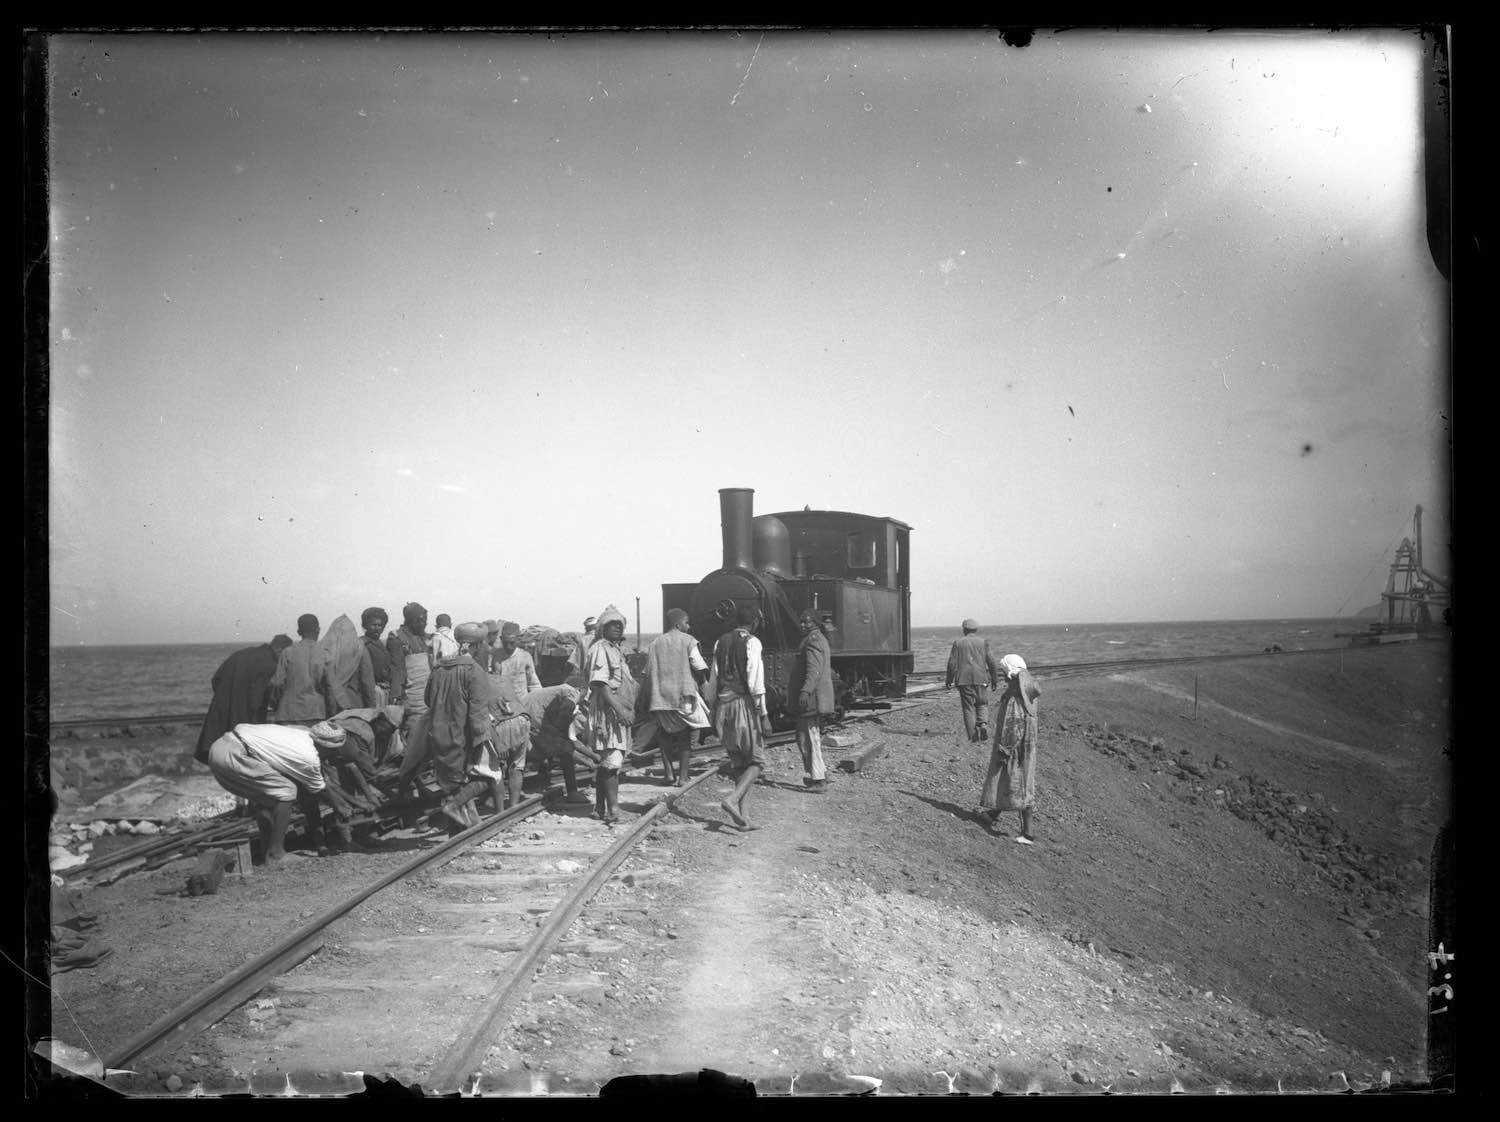 View of a group constructing the railroad line along the quai